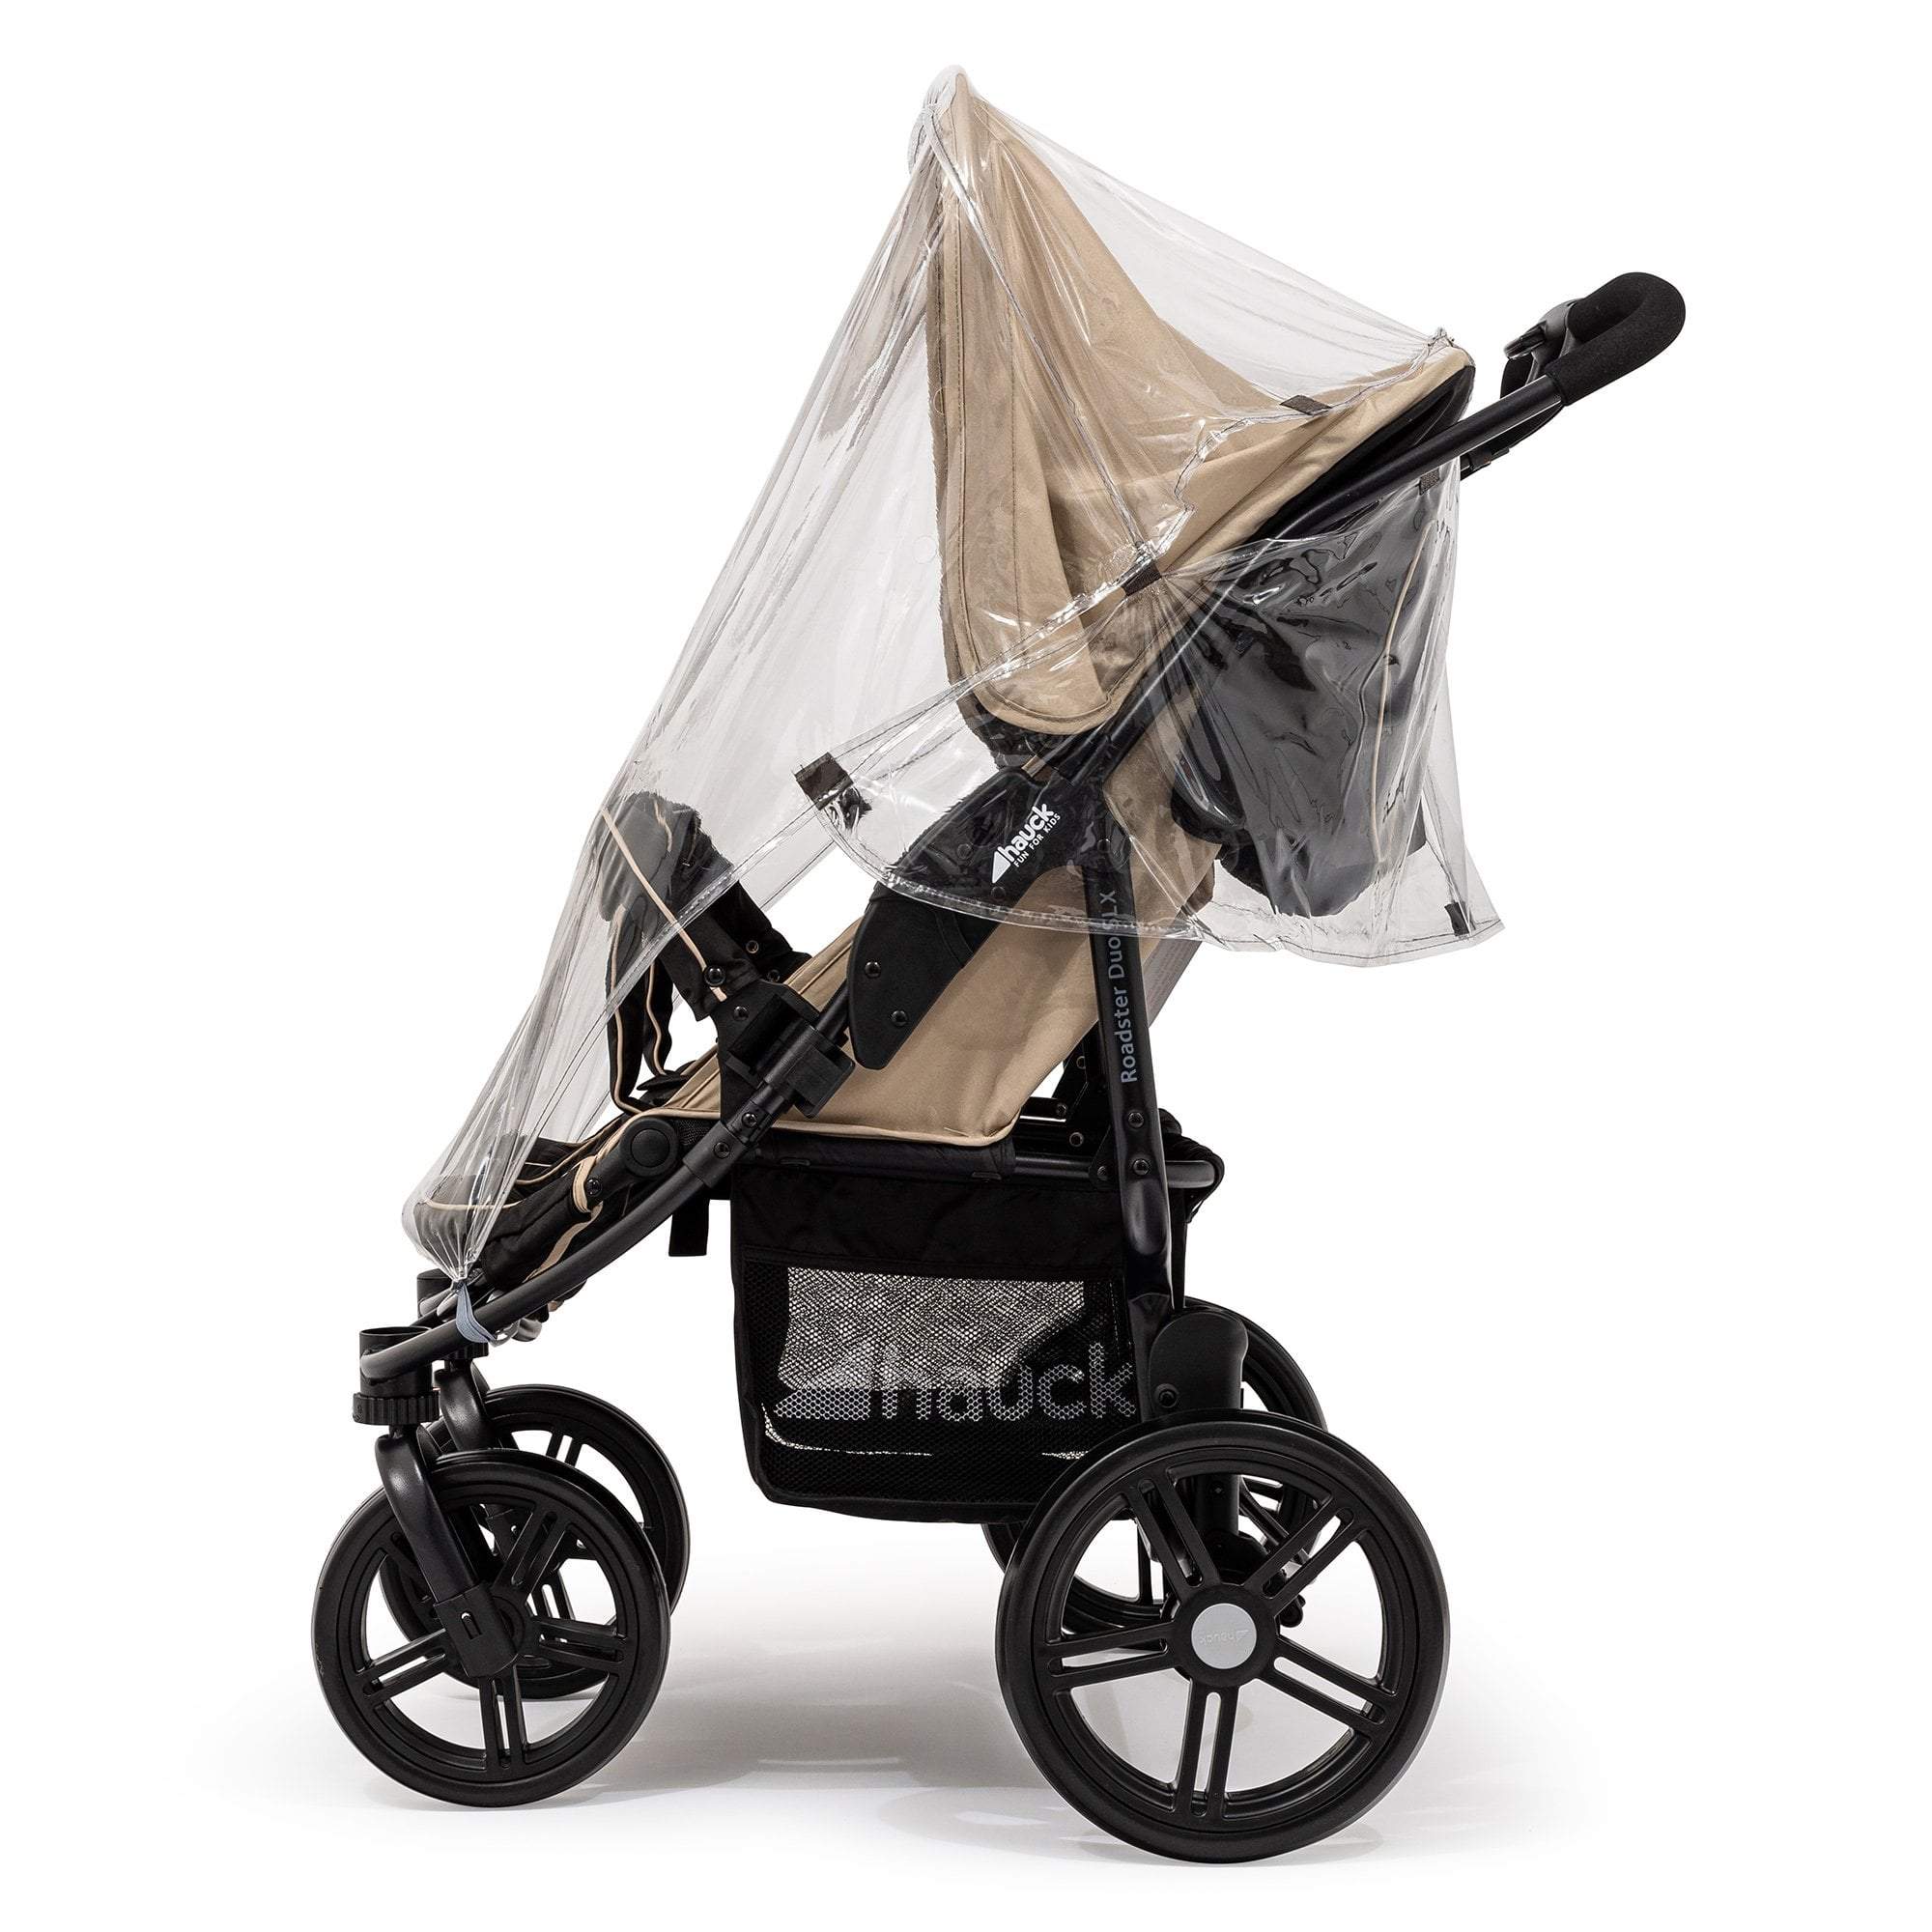 Side by Side Raincover Compatible with Nuna - For Your Little One